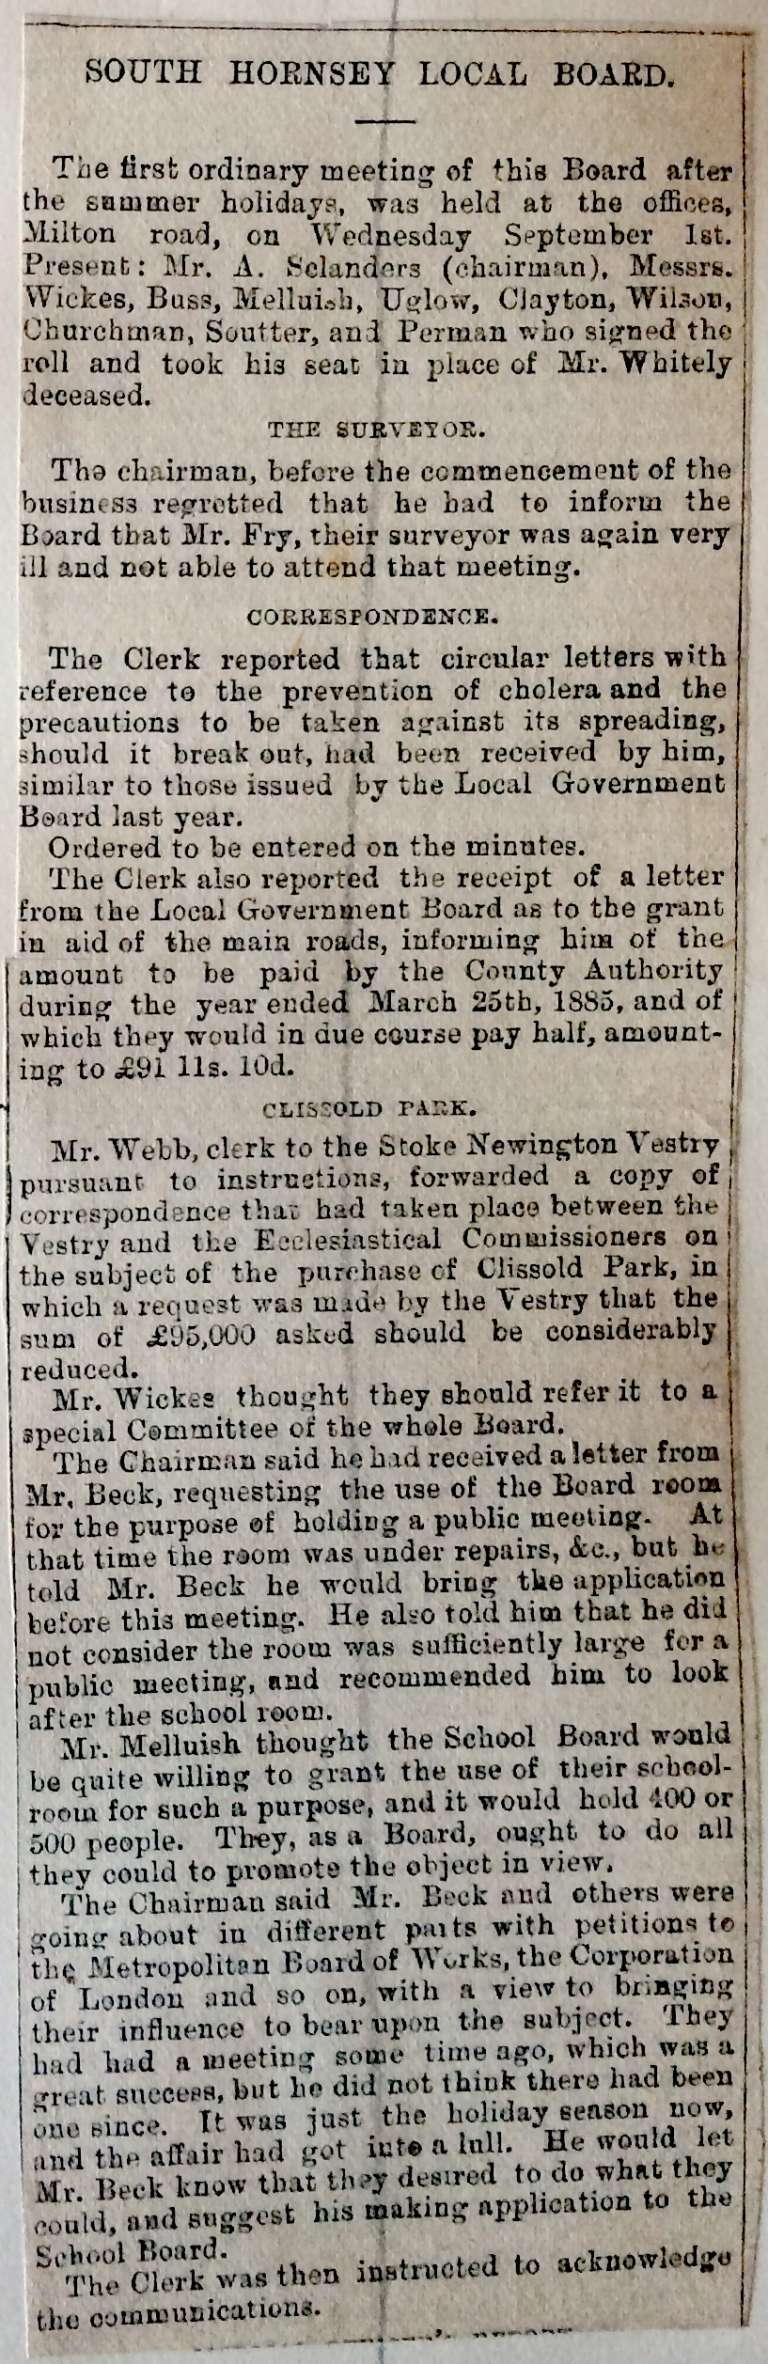 01_09_1886 NEWS CLIPPING South Hornsey Local Board meeting .JPG